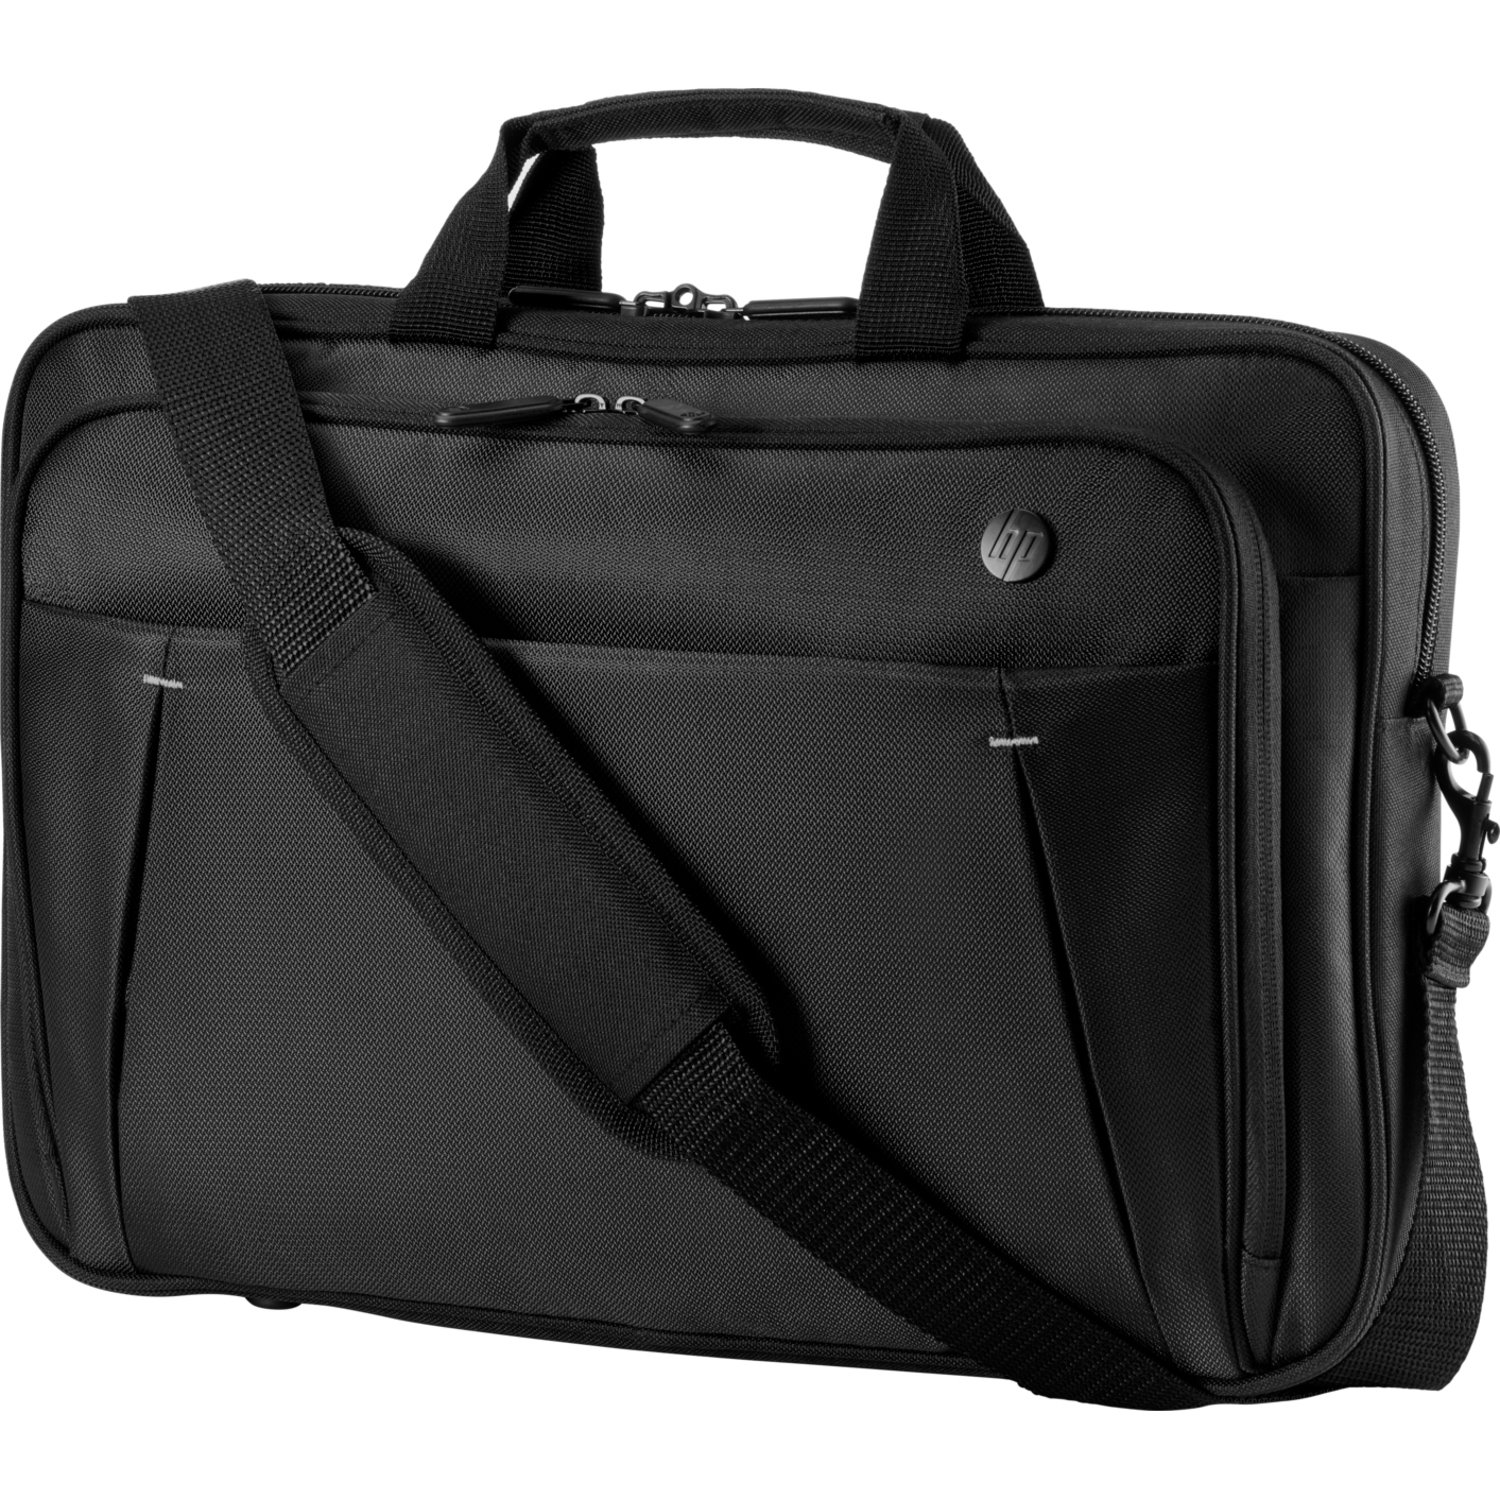 HP Carrying Case for 39.6 cm (15.6") Notebook, Credit Card, Passport, Accessories - Black